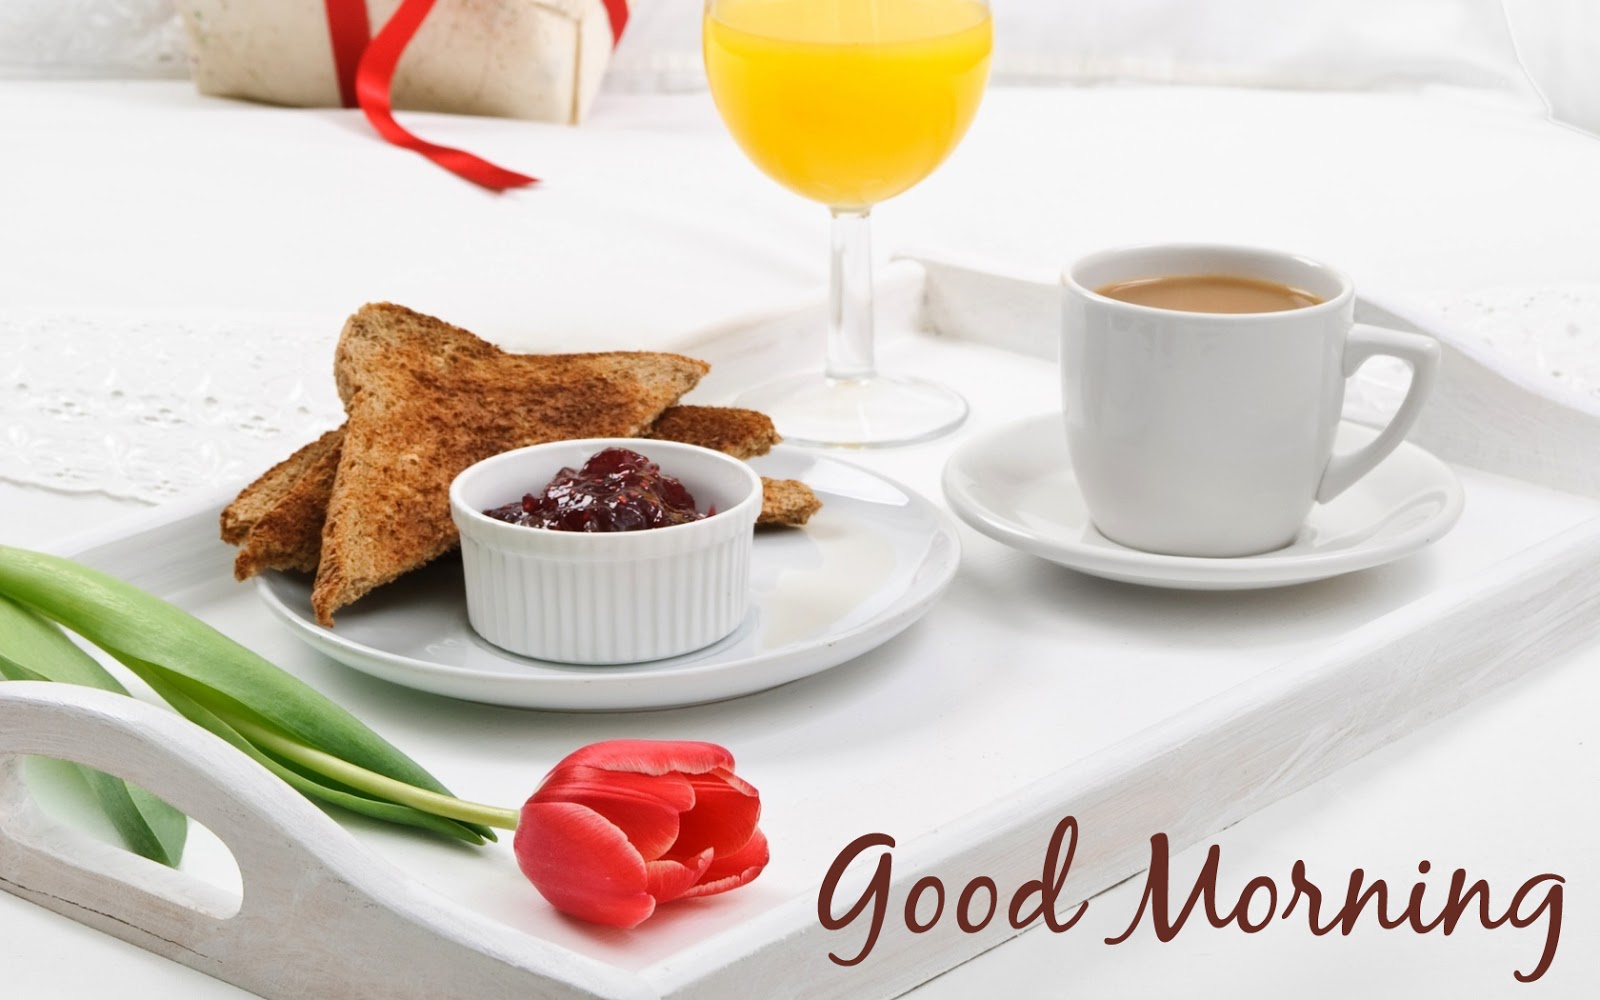  Good Morning   Happy Morning   Have a Nice Day HD Wallpaper